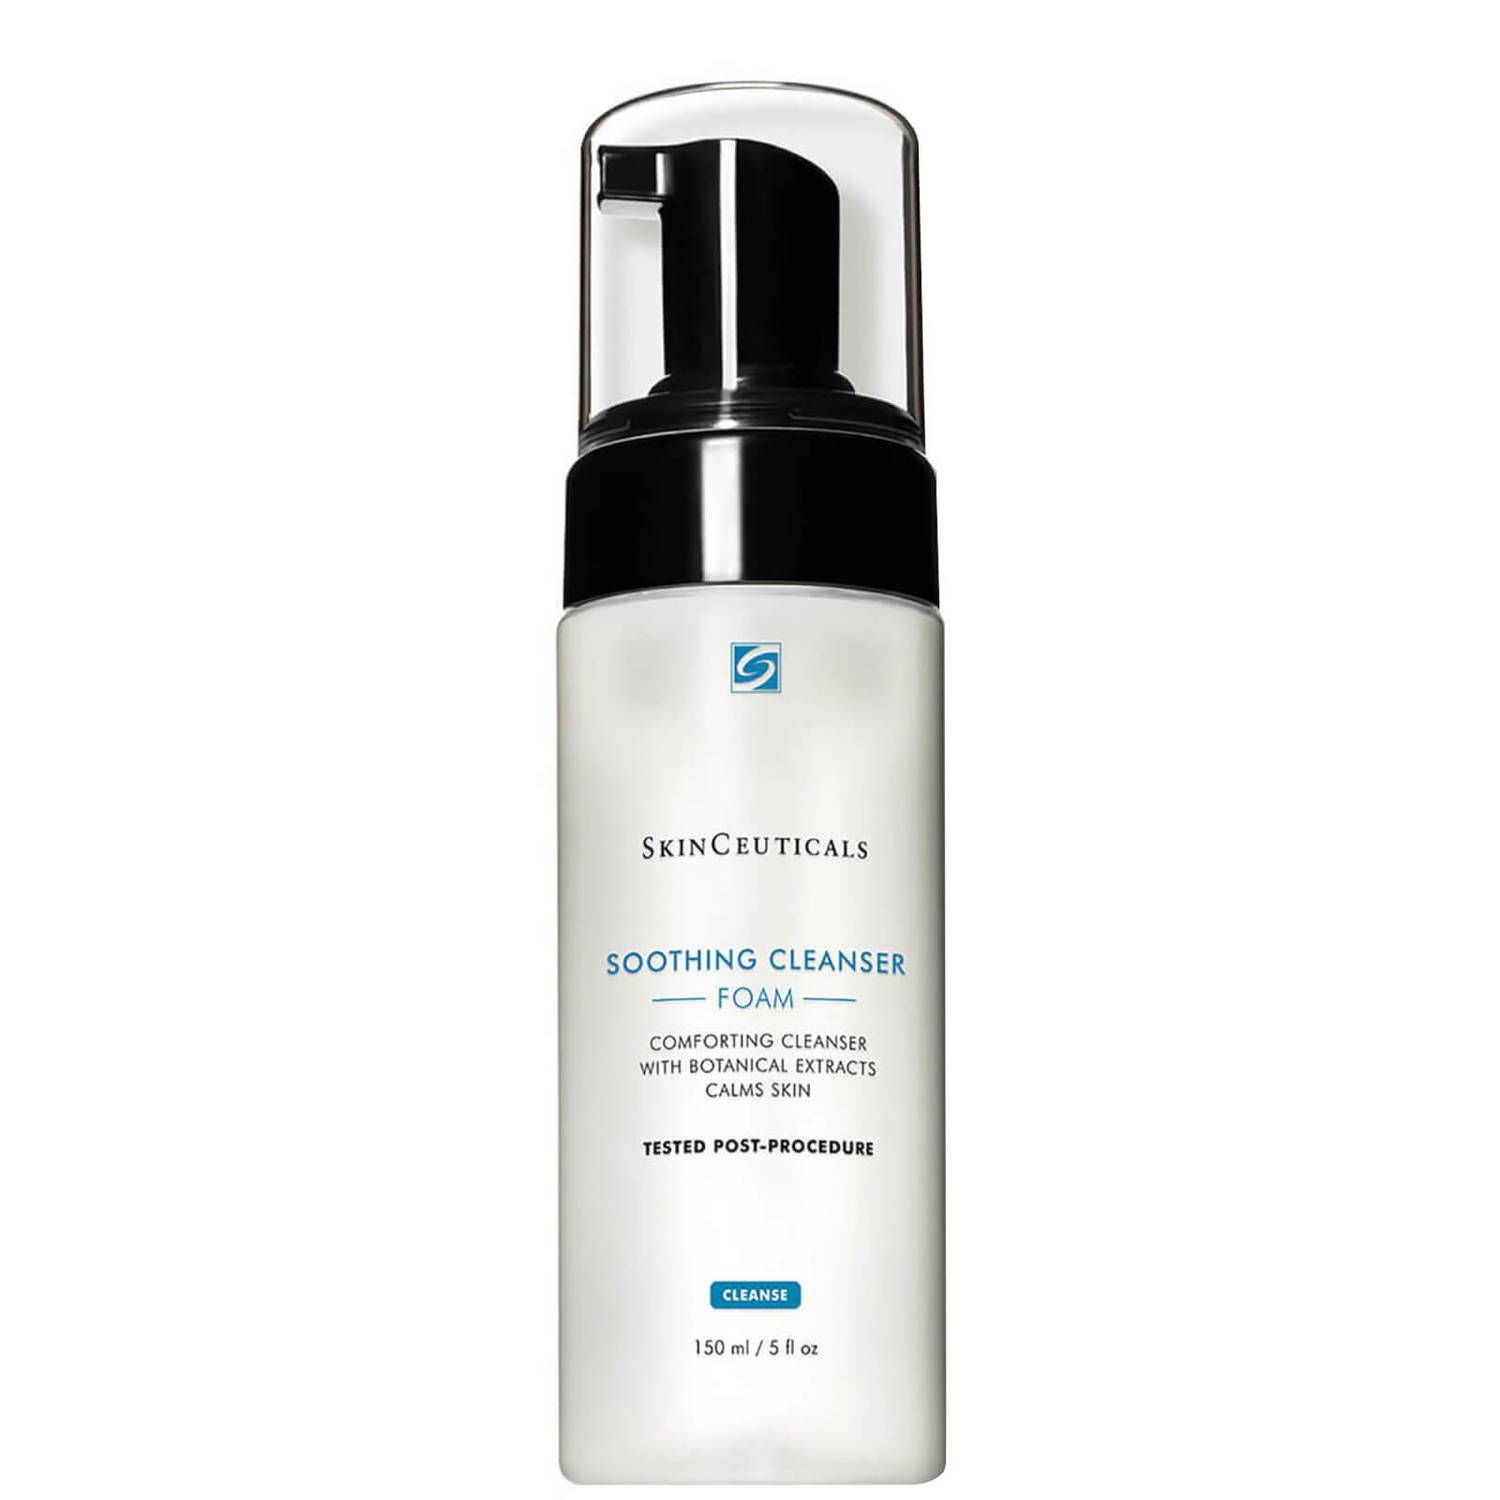 SkinCeuticals Soothing Cleanser (5 fl. oz.) | Dermstore (US)